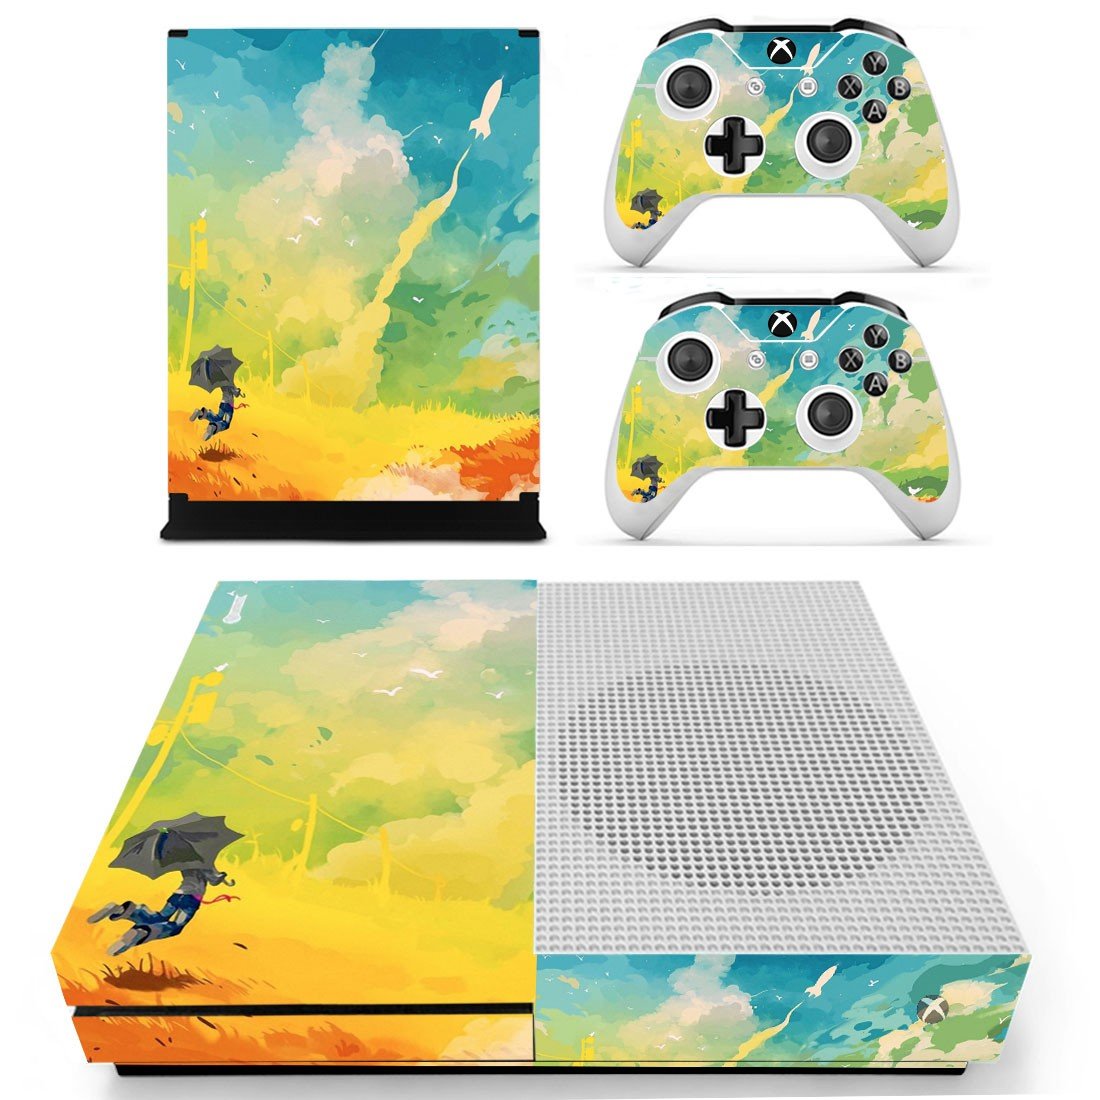 Painted Scene Cover For Xbox One S